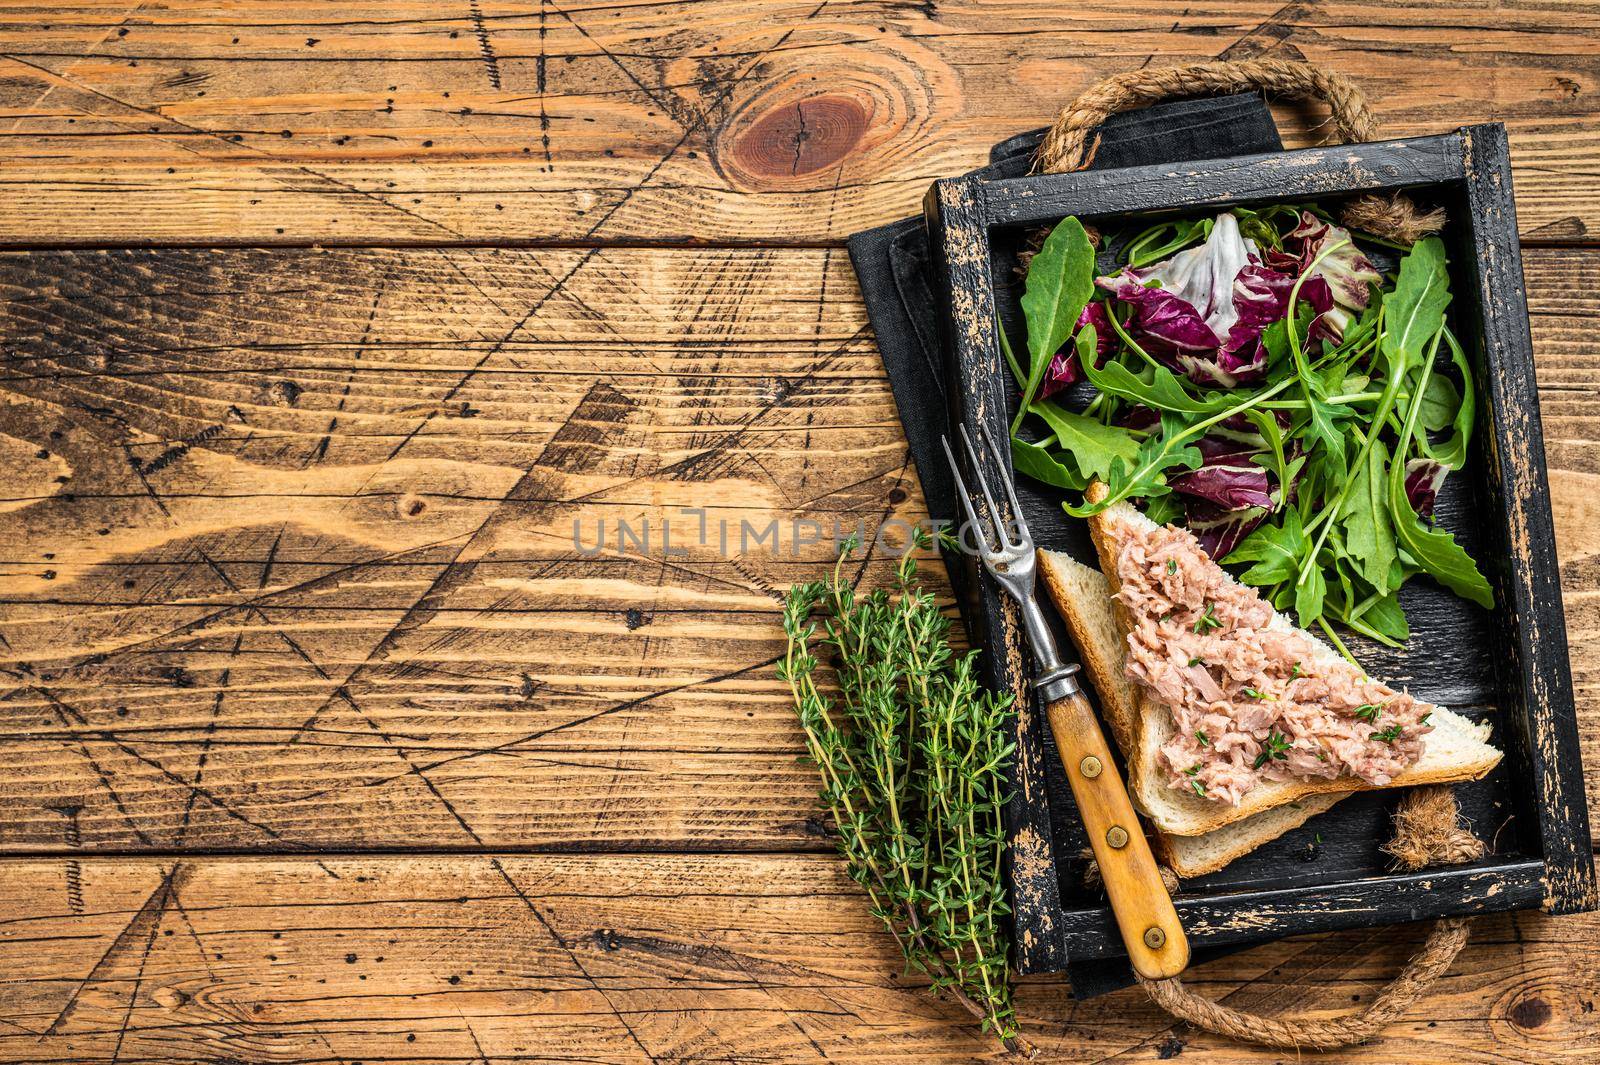 Tuna Salad Sandwich with Cheese, lettuce and arugula. Wooden background. Top view. Copy space by Composter